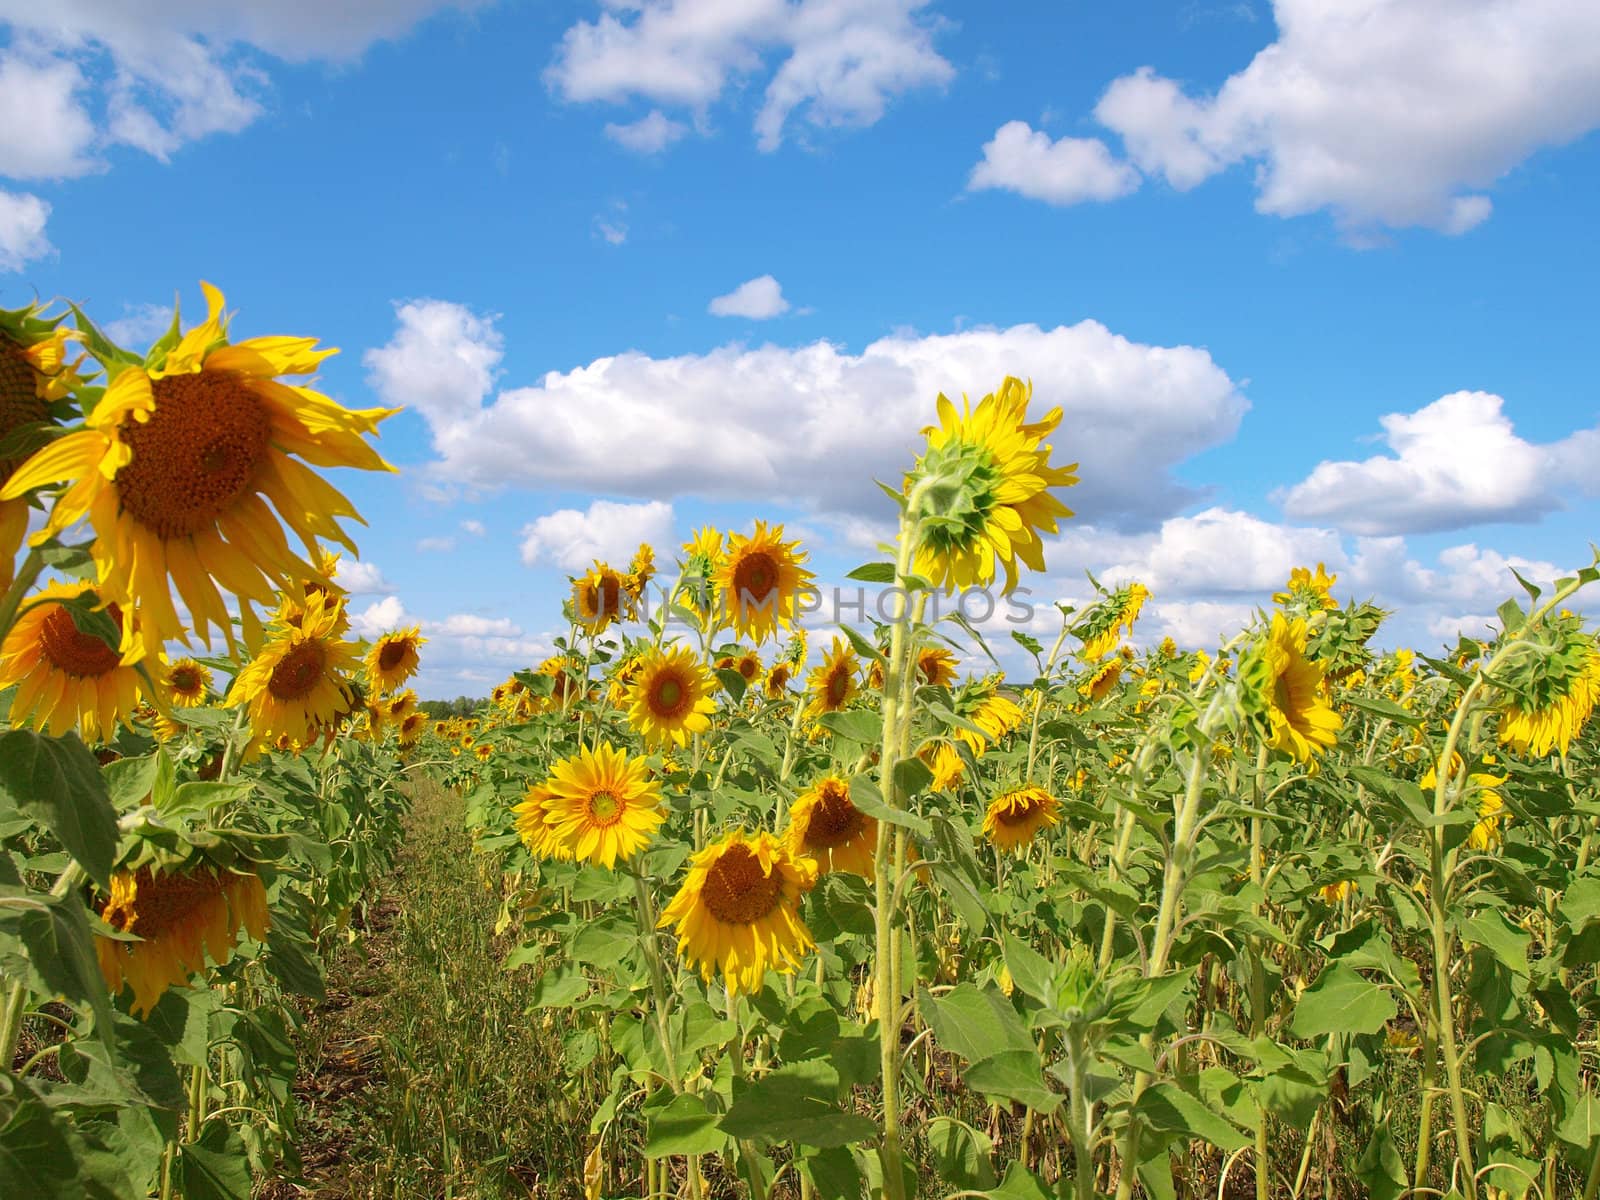 Sunflower's field with blue sky by sergpet